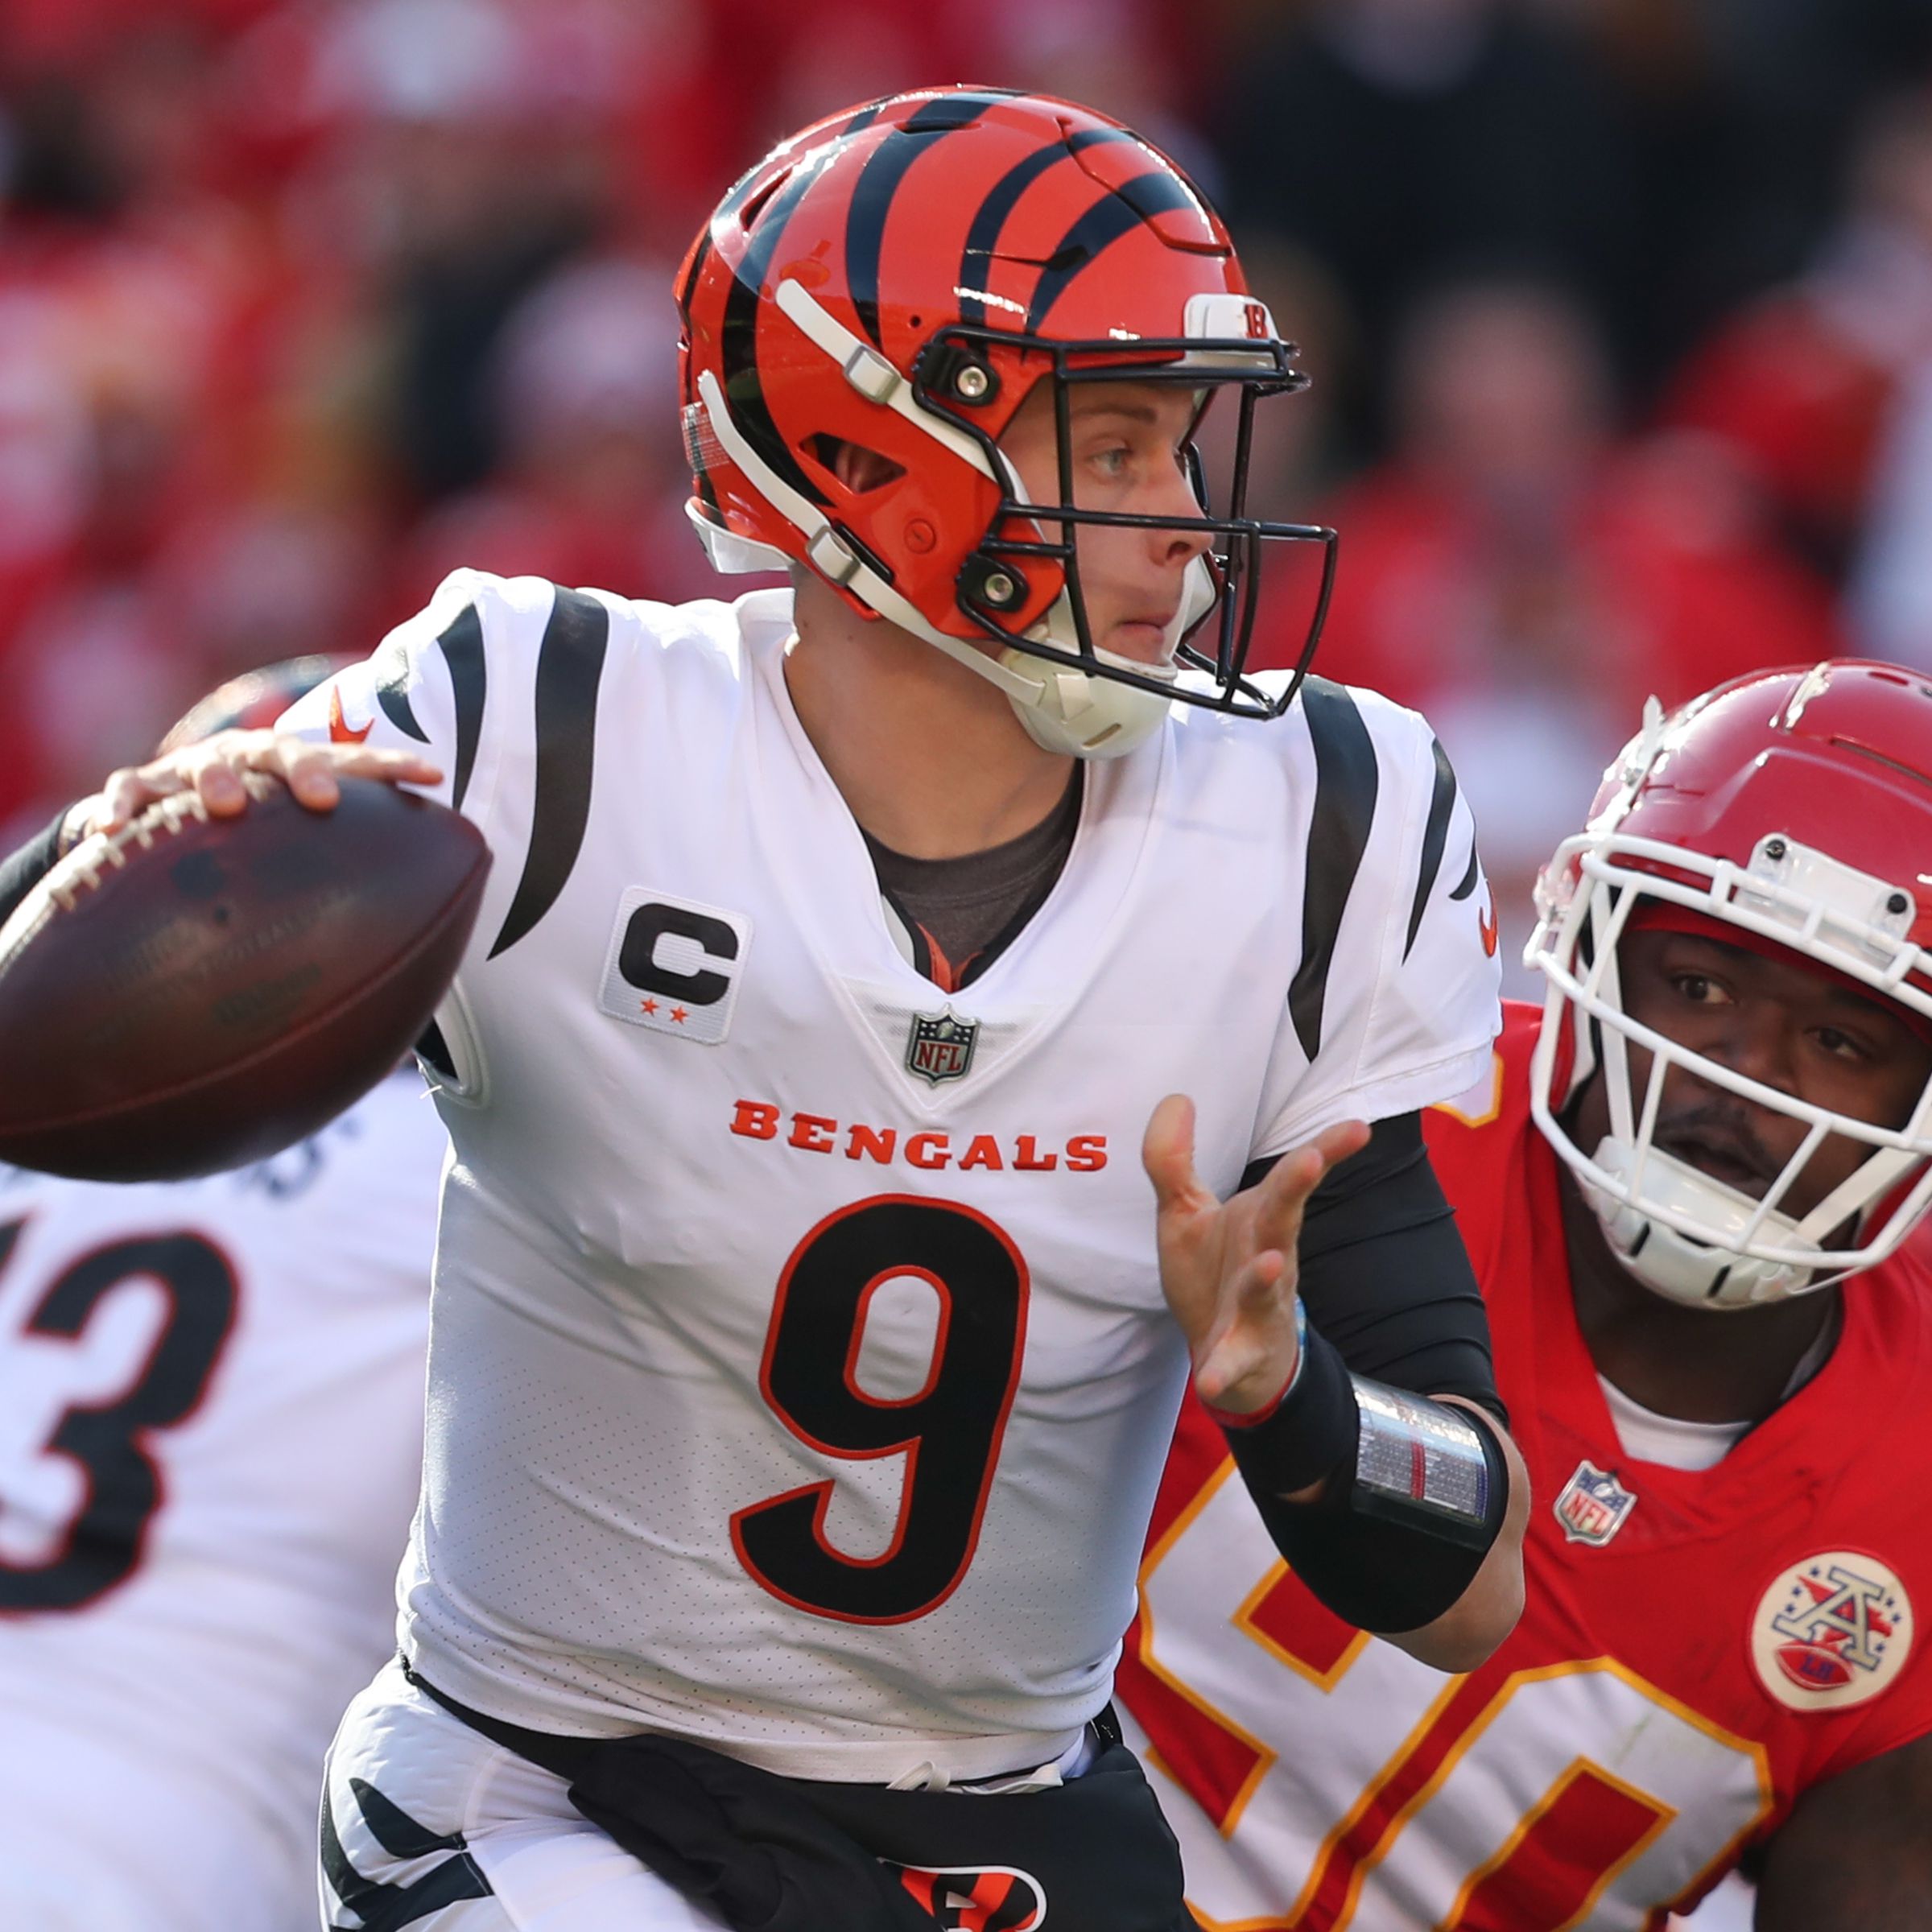 An image of Joe Burrow, #9, quarterback for the Cincinnati Bengals, during the AFC Championship game against the Kansas City Chiefs.